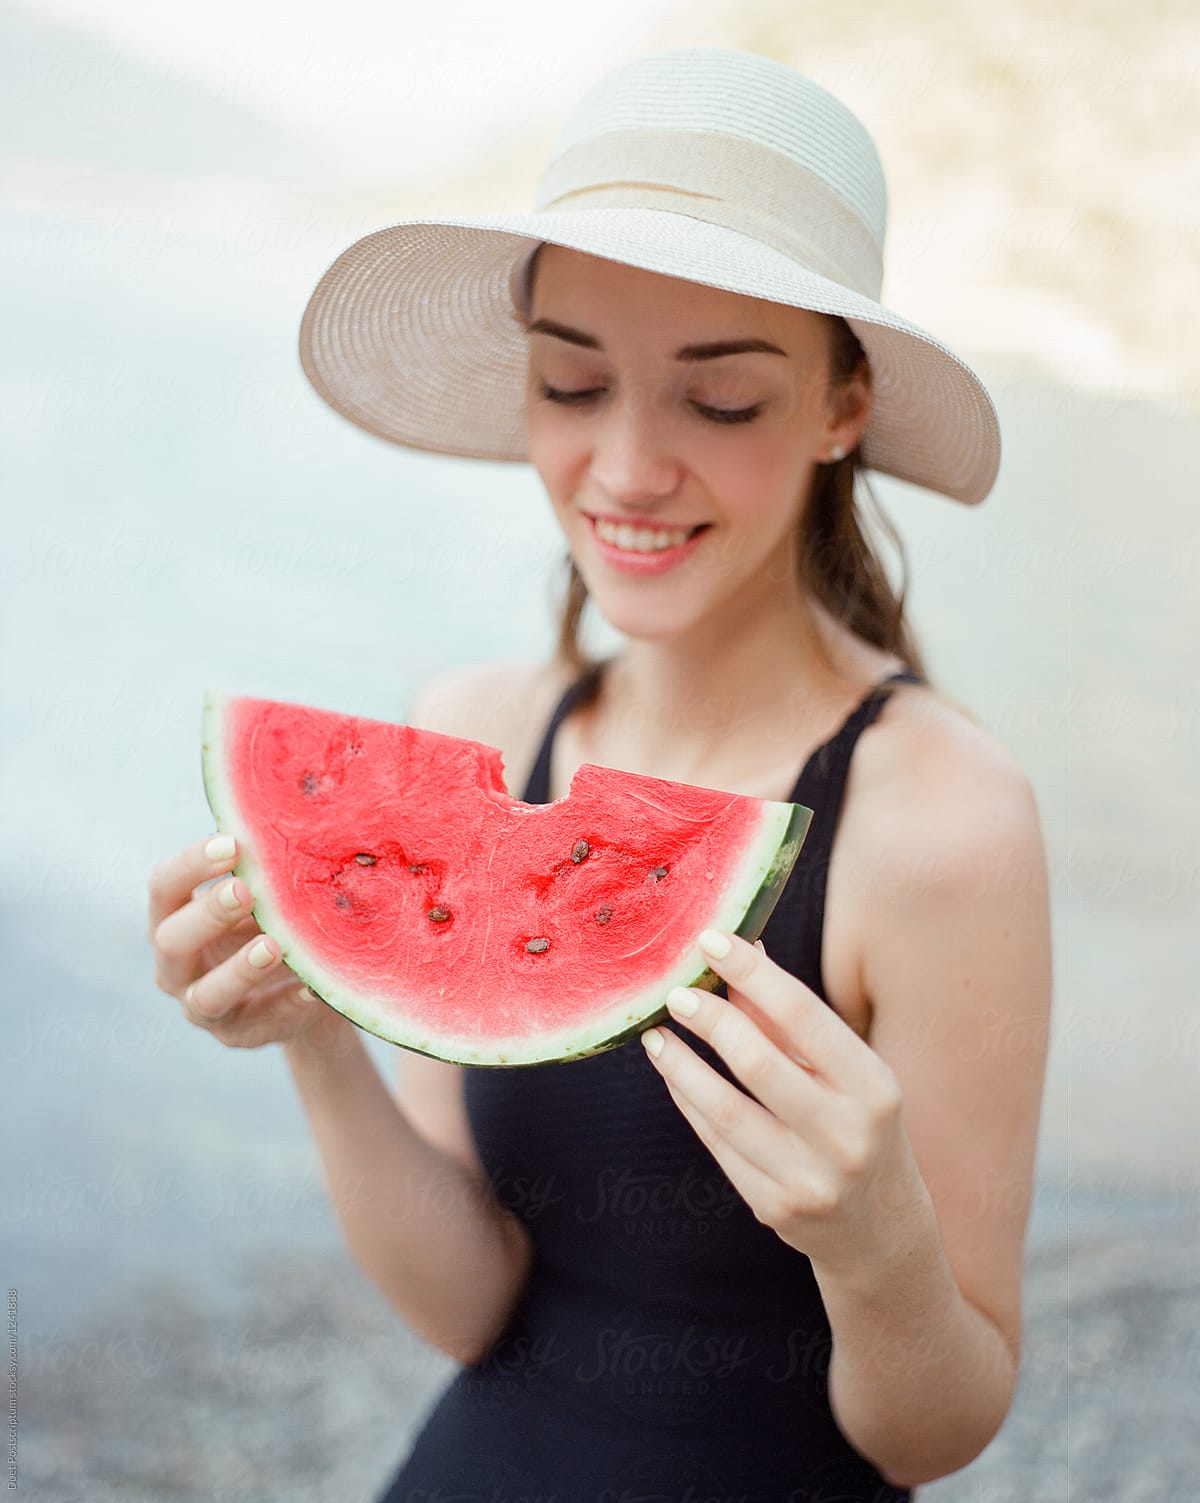 Smiling woman holding slice of watermelon